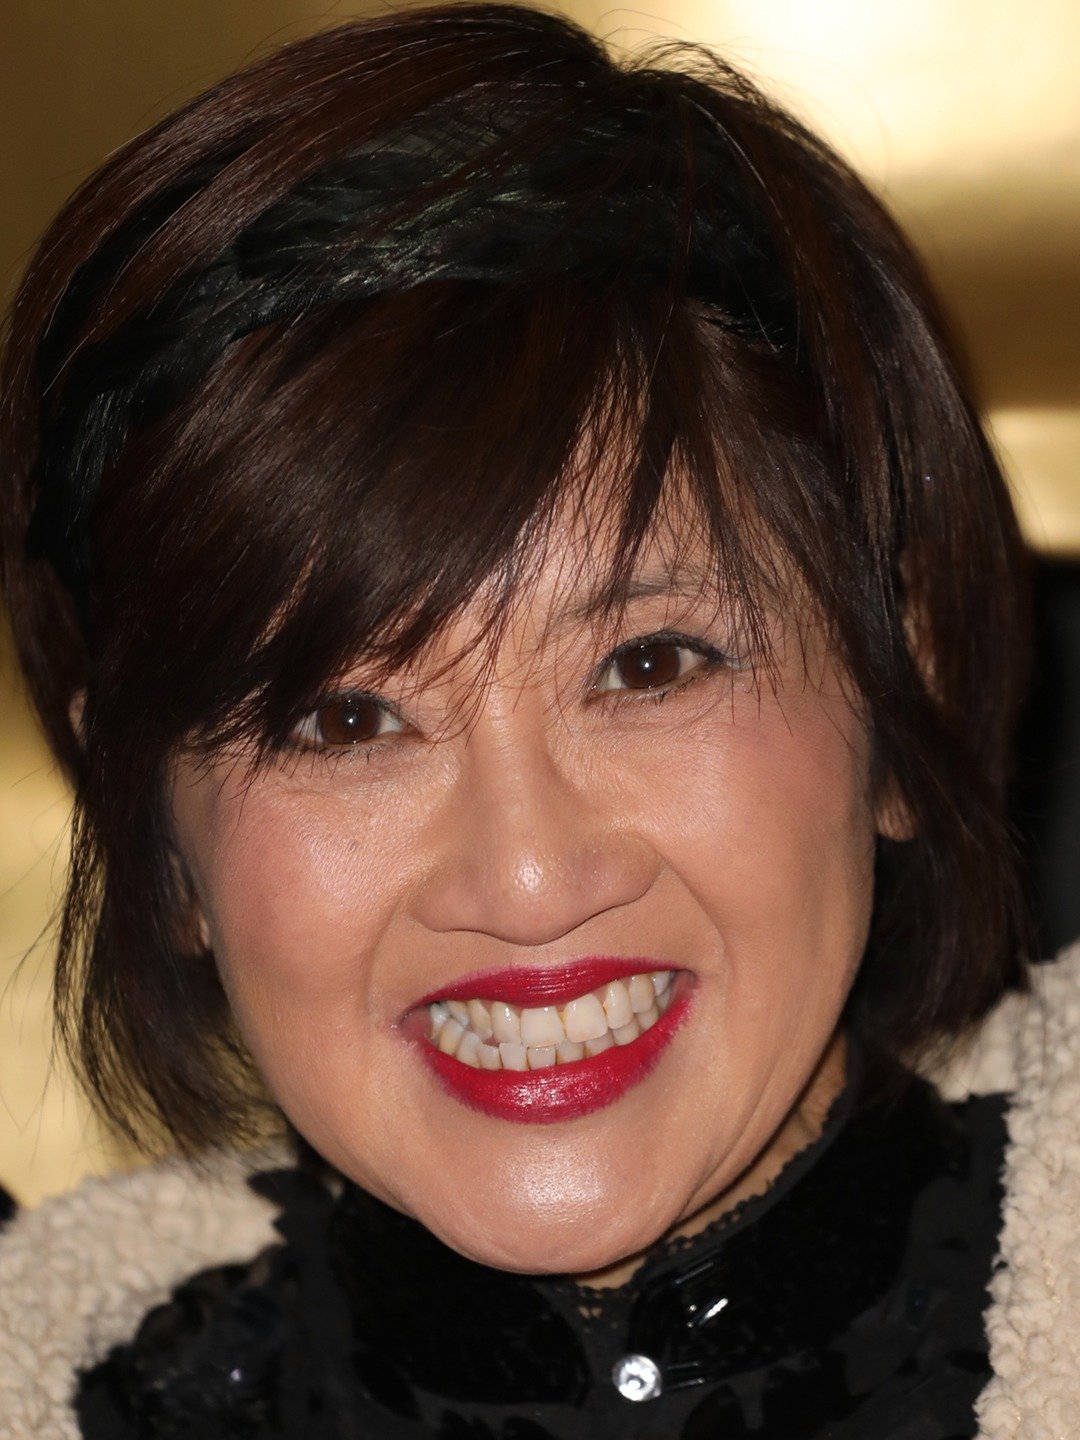 Pui fan lee movies and tv shows